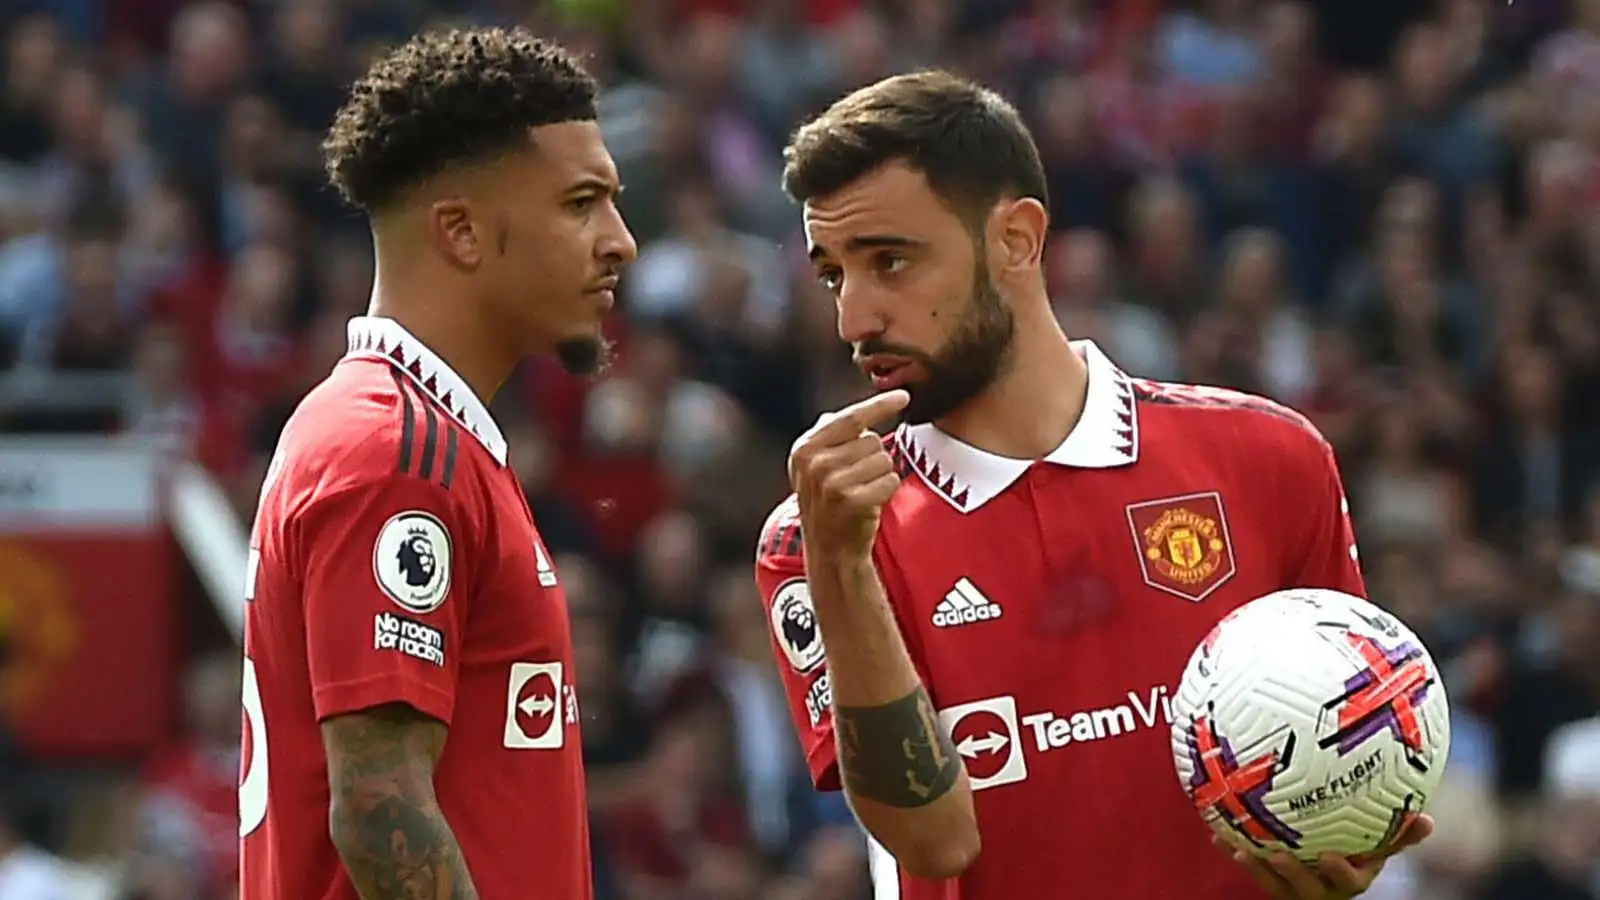 Manchester United's Bruno Fernandes, right, talks with Manchester United's Jadon Sancho during the English Premier League soccer match between Manchester United and Fulham at Old Trafford in Manchester, England, Sunday, May 28, 2023